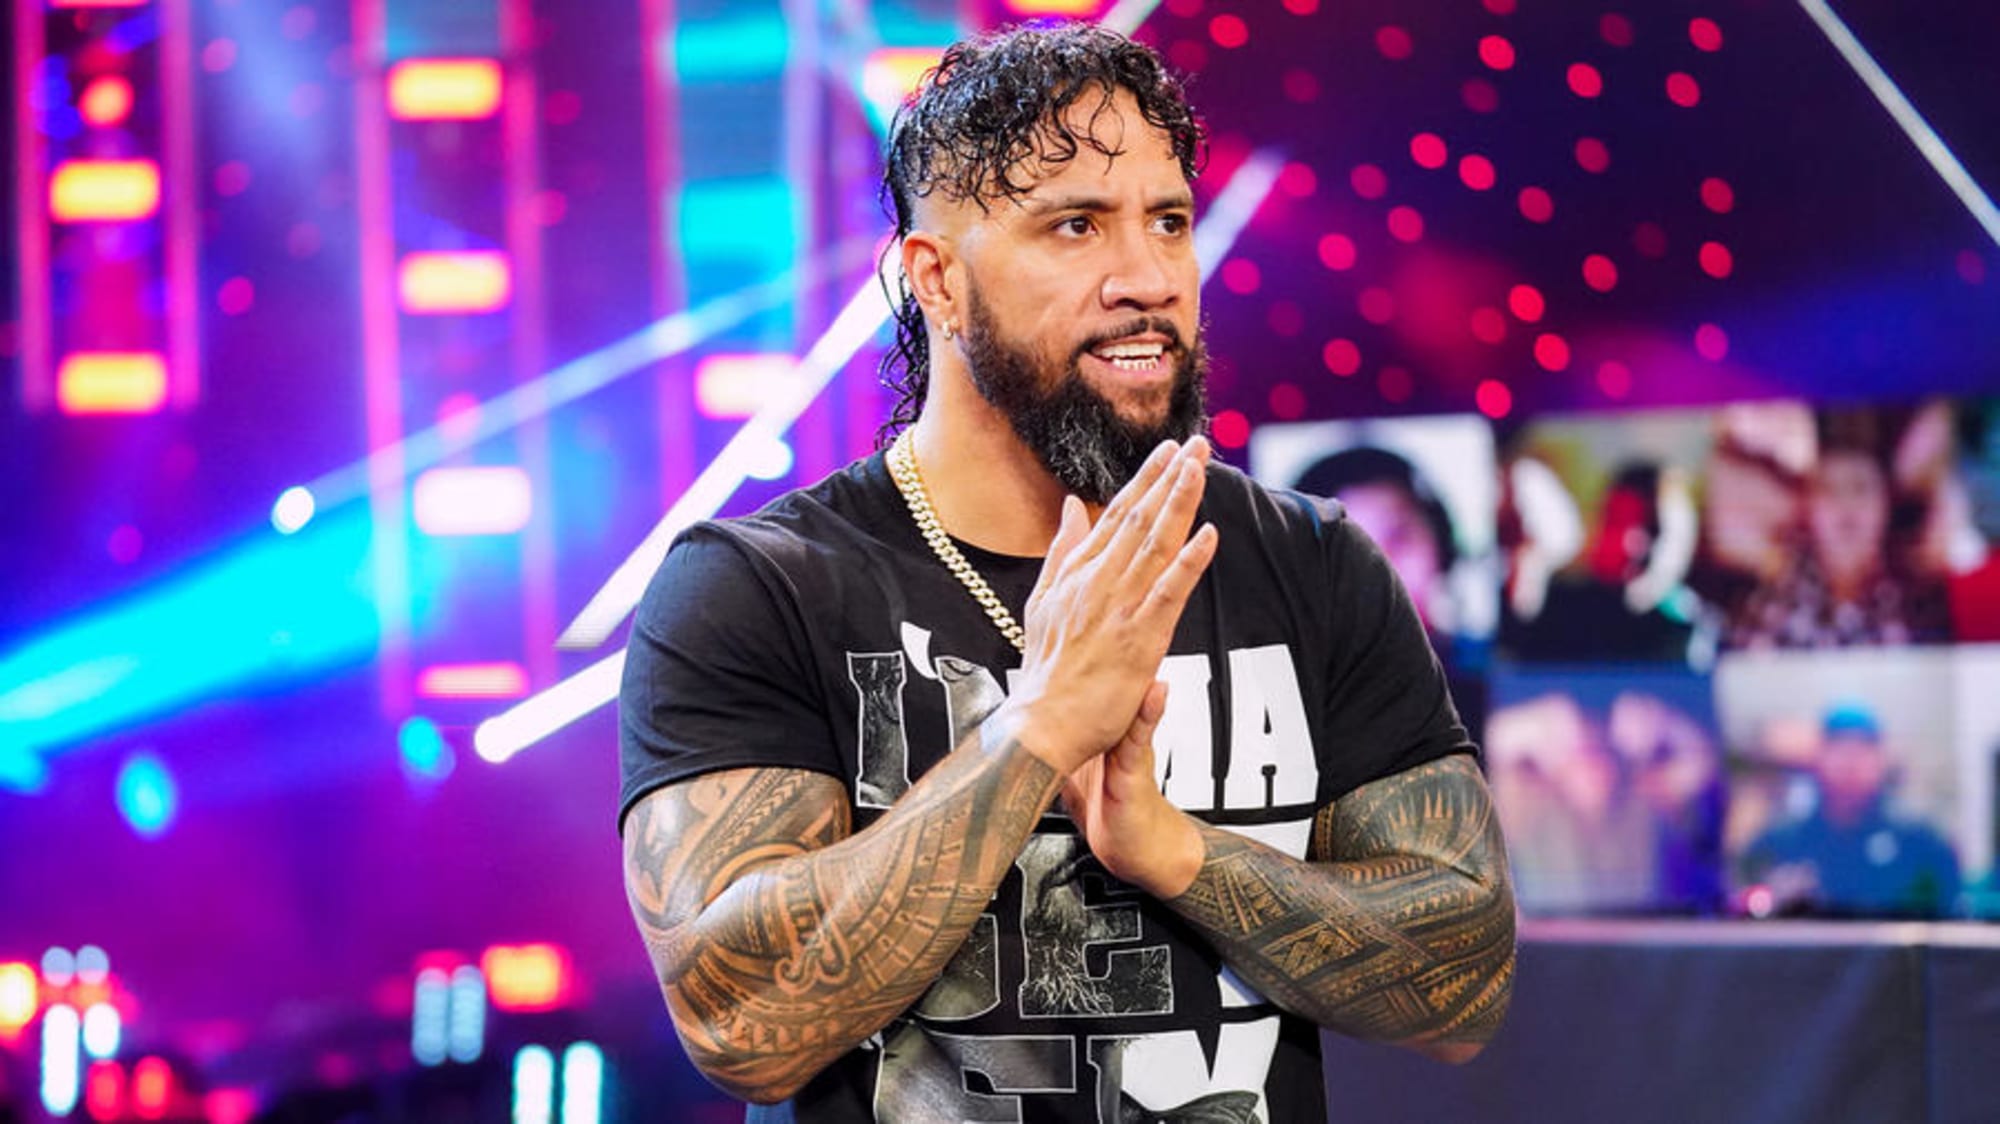 Jey Uso returned to SmackDown, adding another layer to Bloodline story